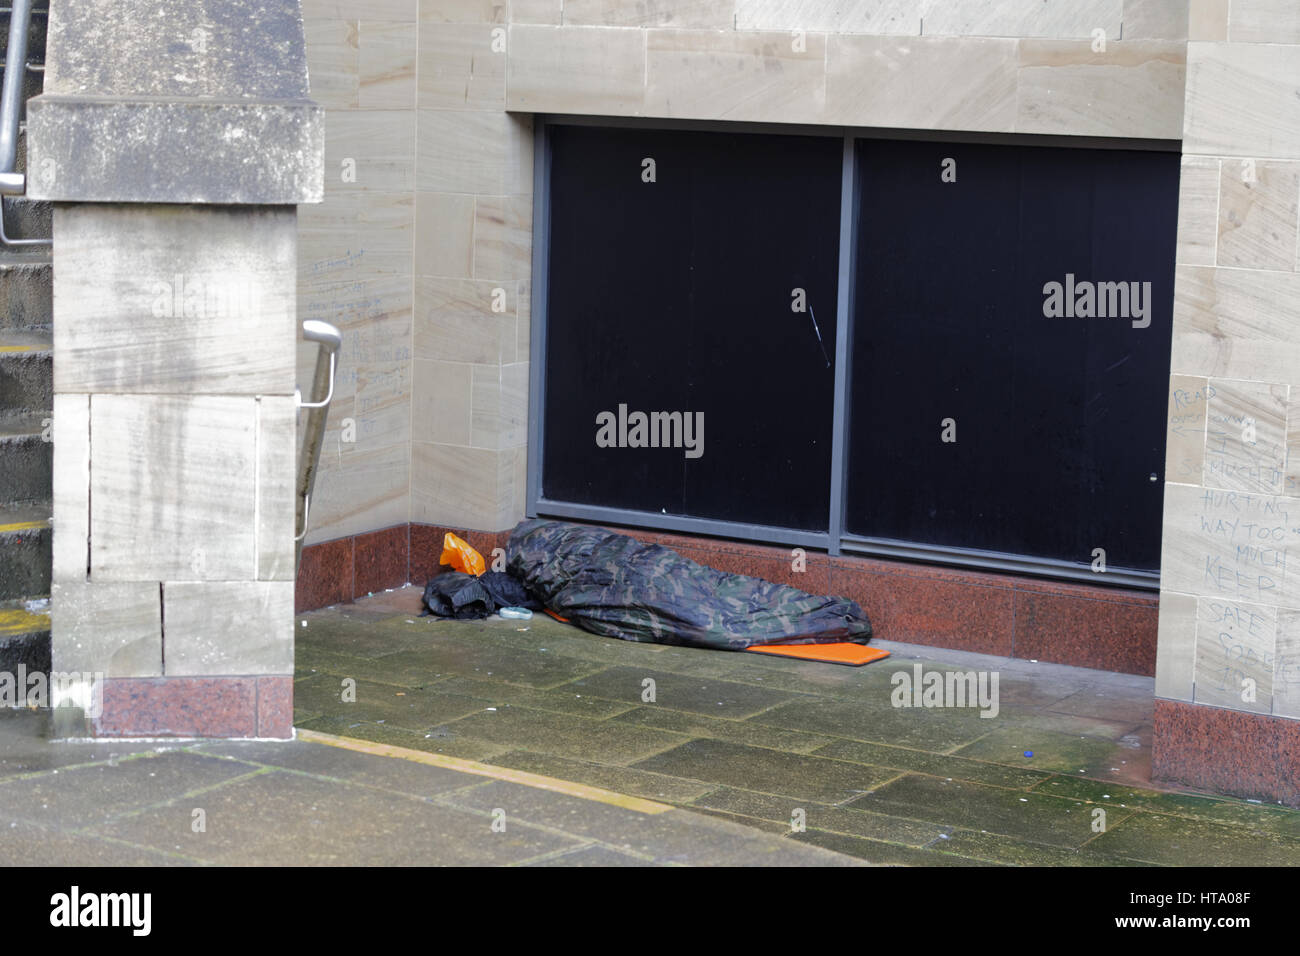 homeless in the uk begging on the street cameo camouflage sleeping bag Stock Photo